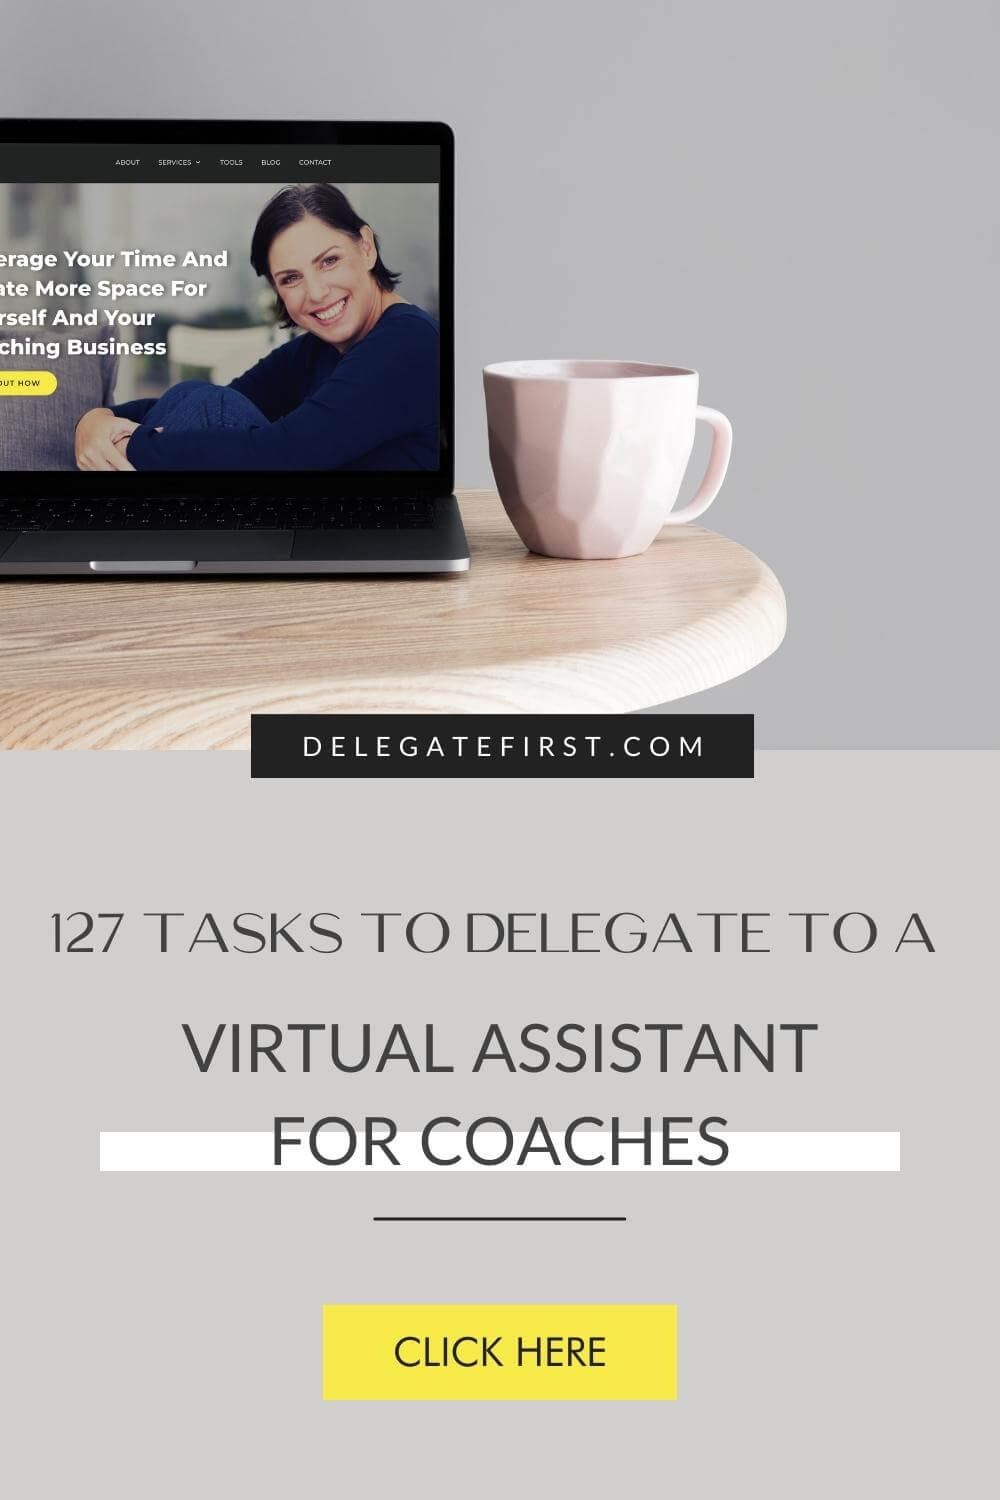 127 Tasks to Delegate to a Virtual Assistant for Coaches | Delegate First